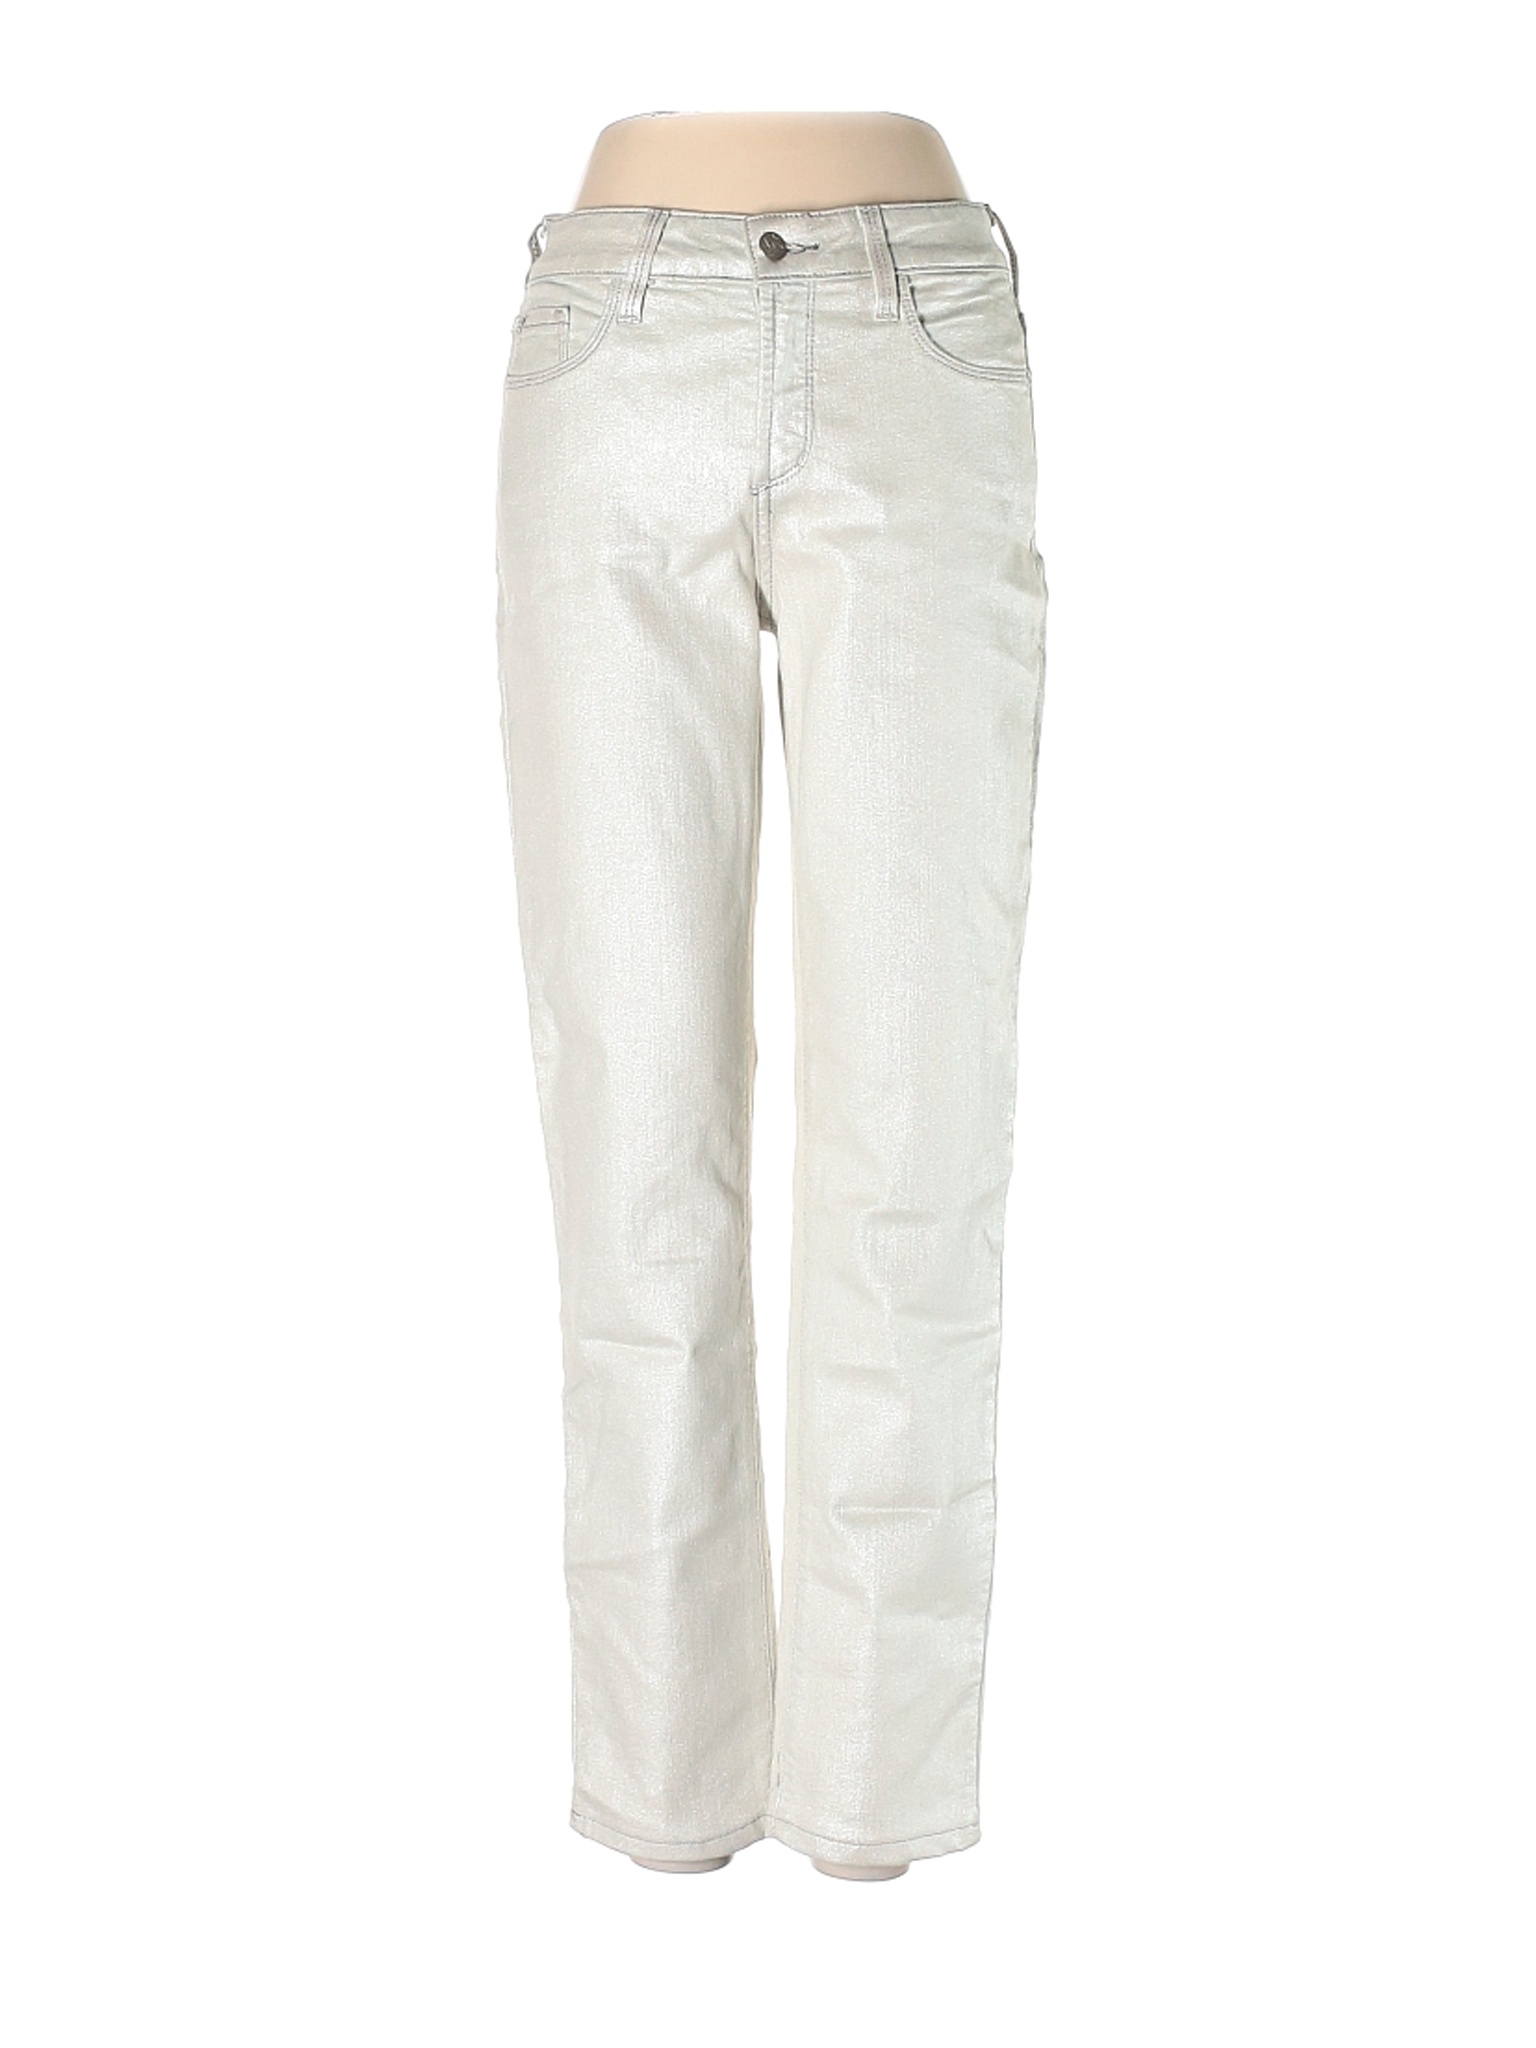 coated white jeans